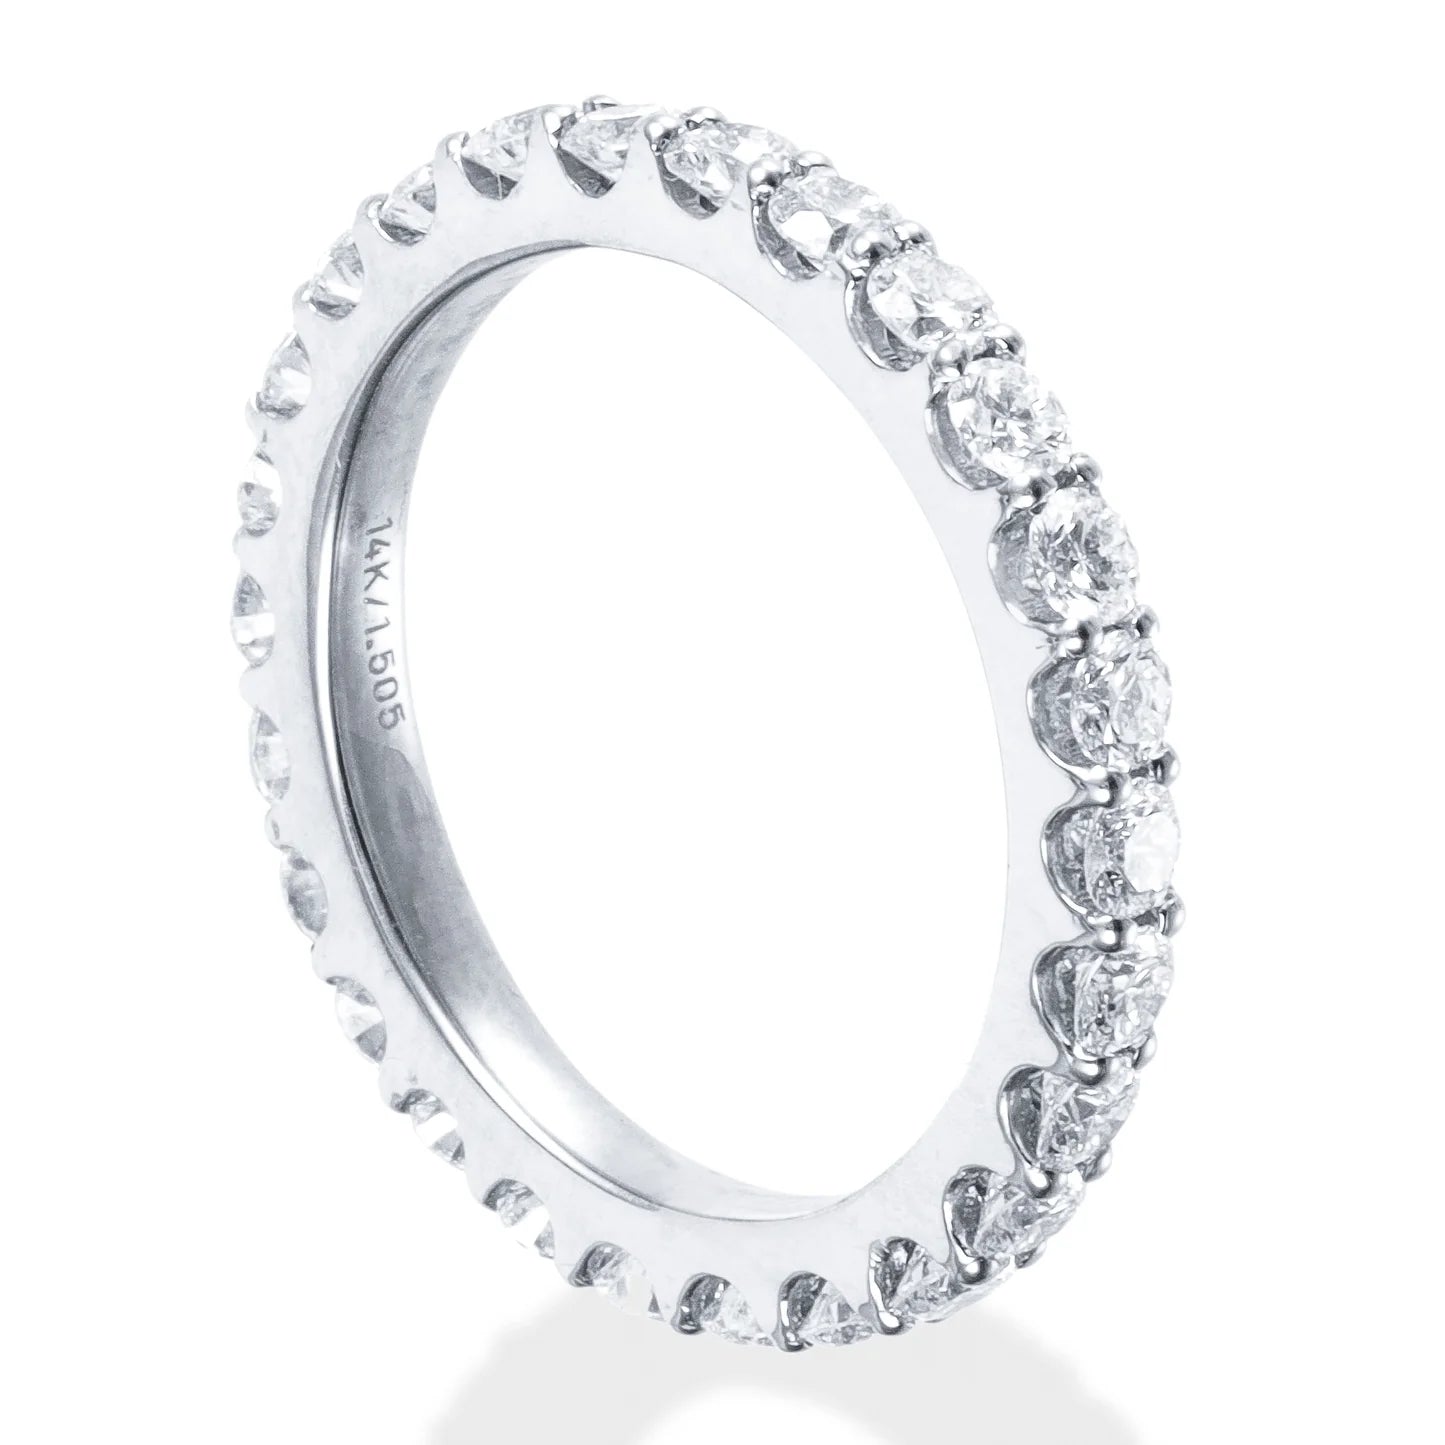 14kt White Gold Simple Pave Diamond Ring Band